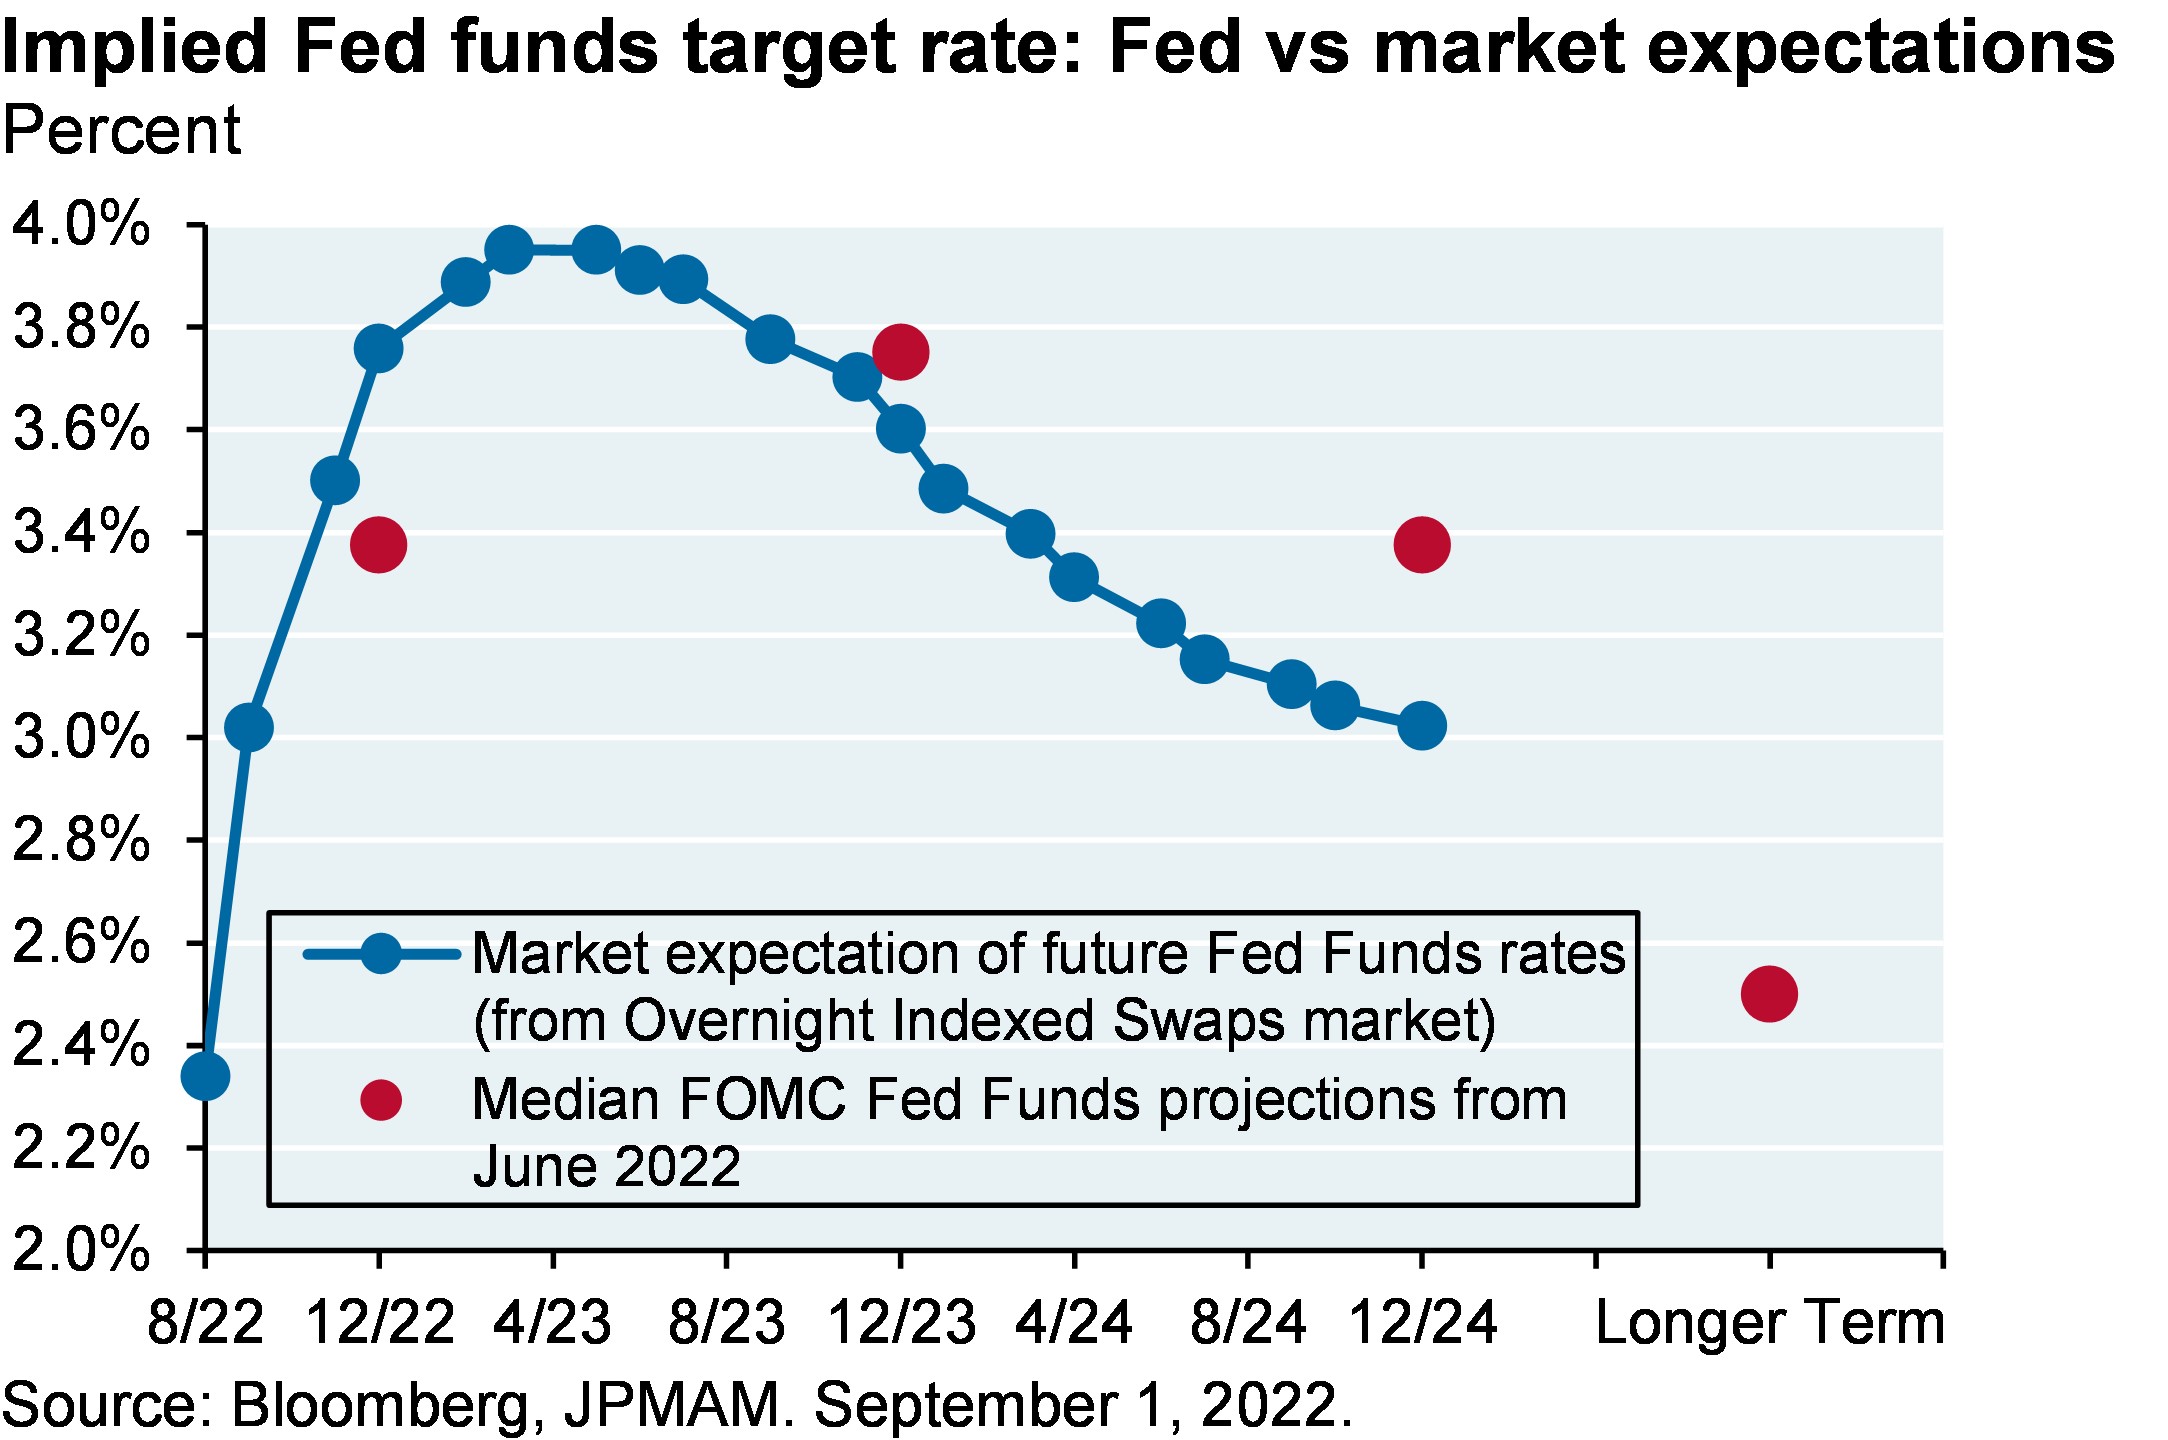 Implied Fed funds target rate: Fed vs market expectations